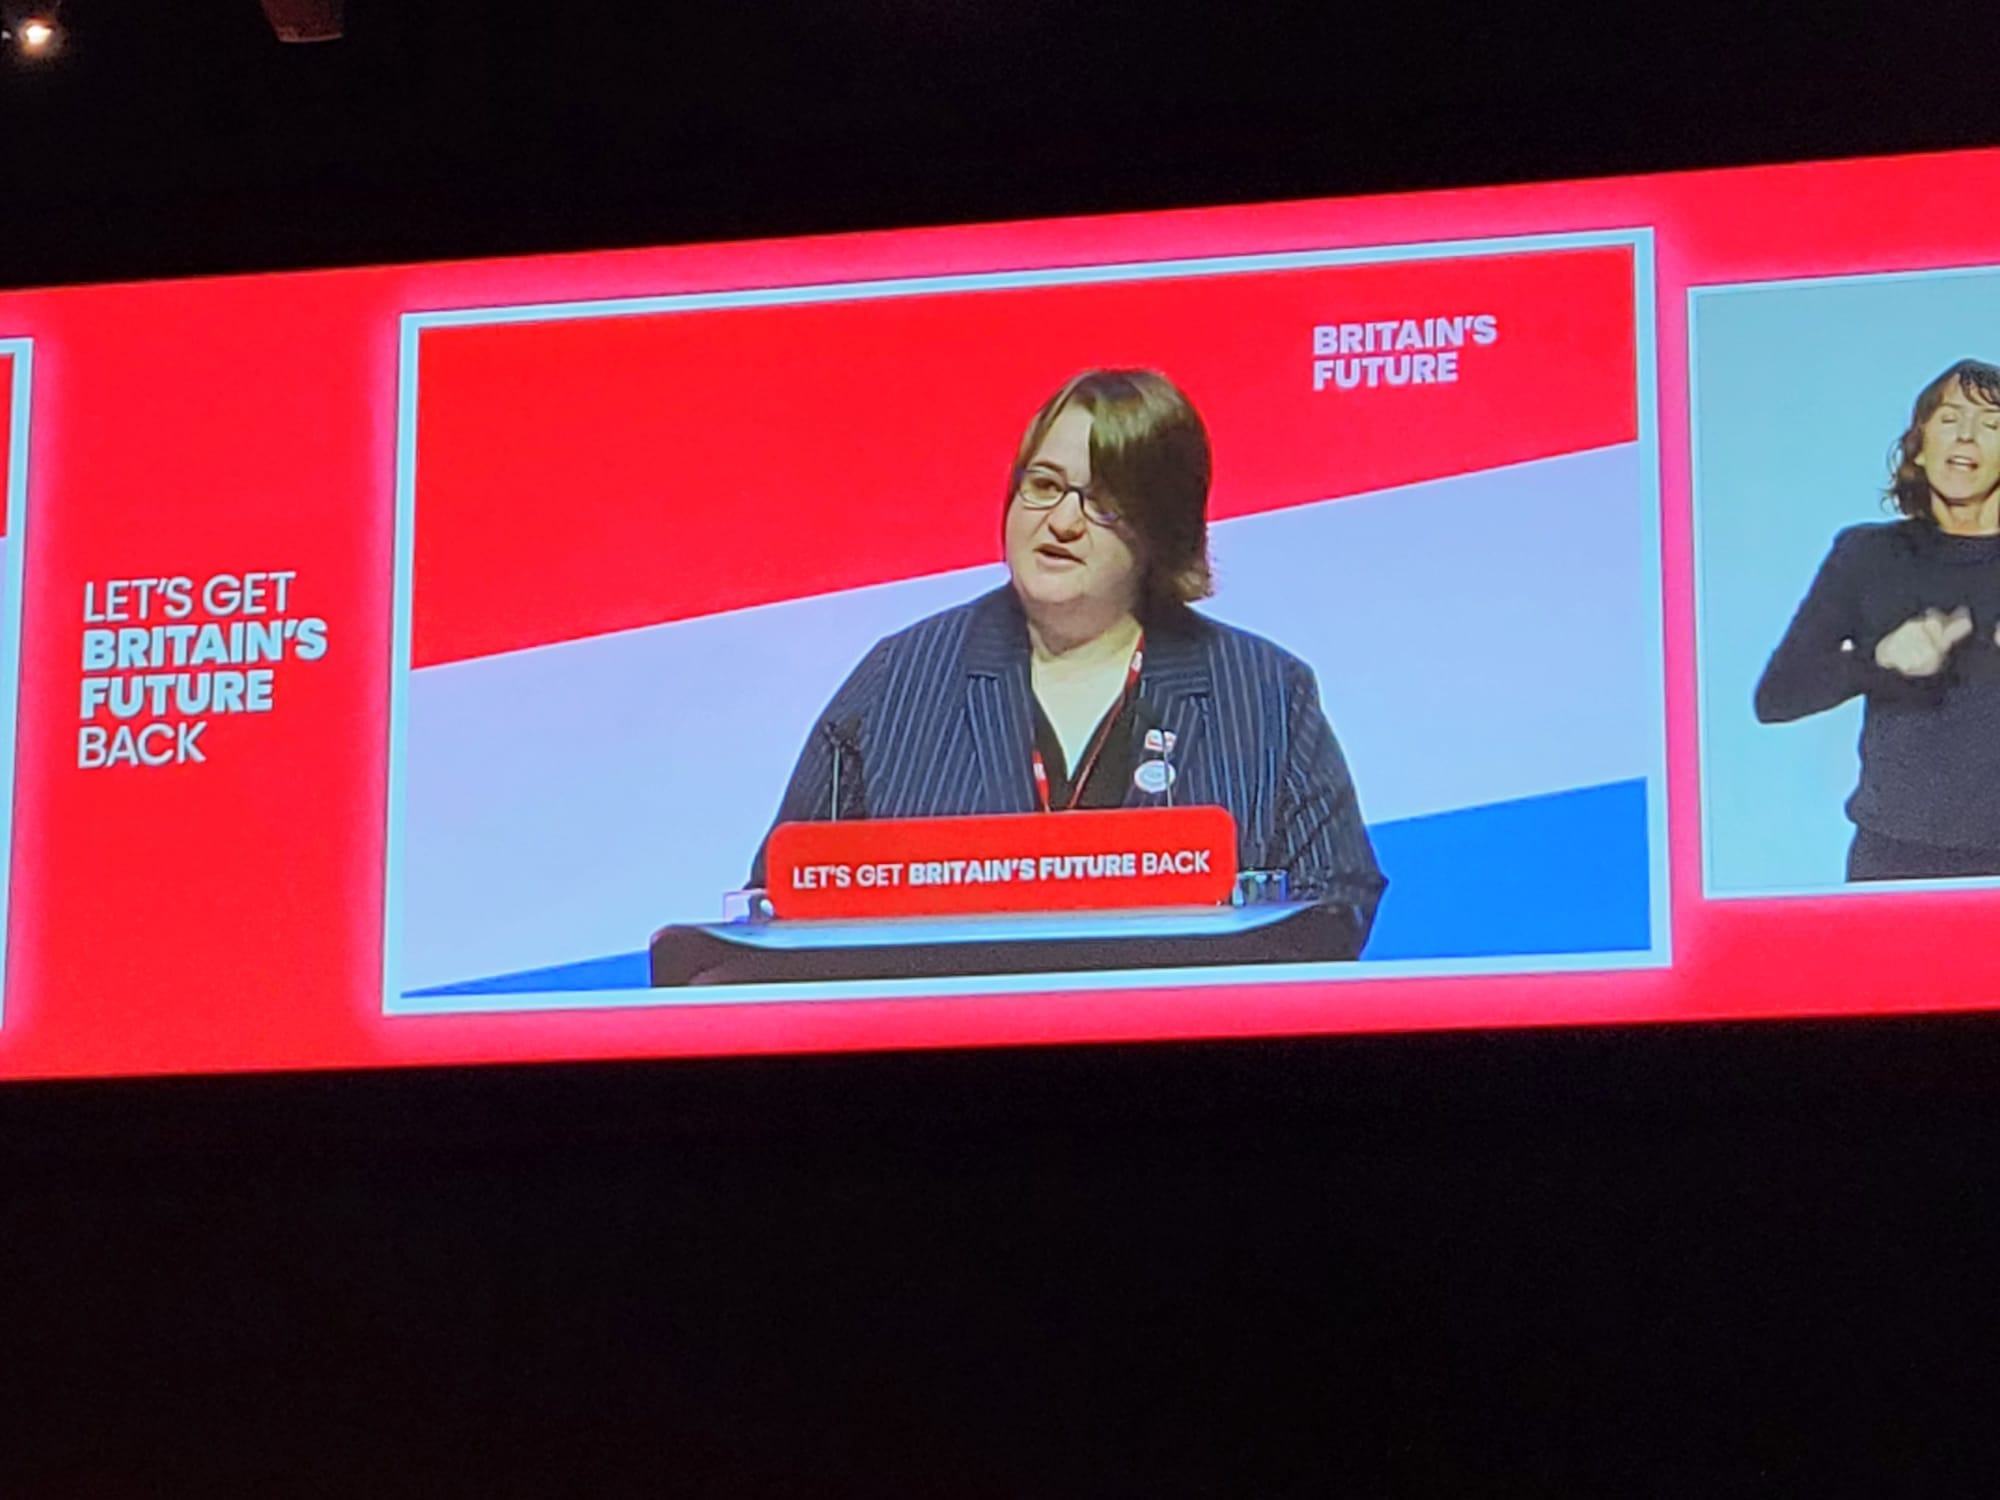 TSSA President Melissa Heywood, a white woman with brown hair, wearing a dark pinstriped shirt, stands at a podium speaking to Labour conference. Behind her are red, white and blue stripes on the wall. On one side is a sign language translator. 